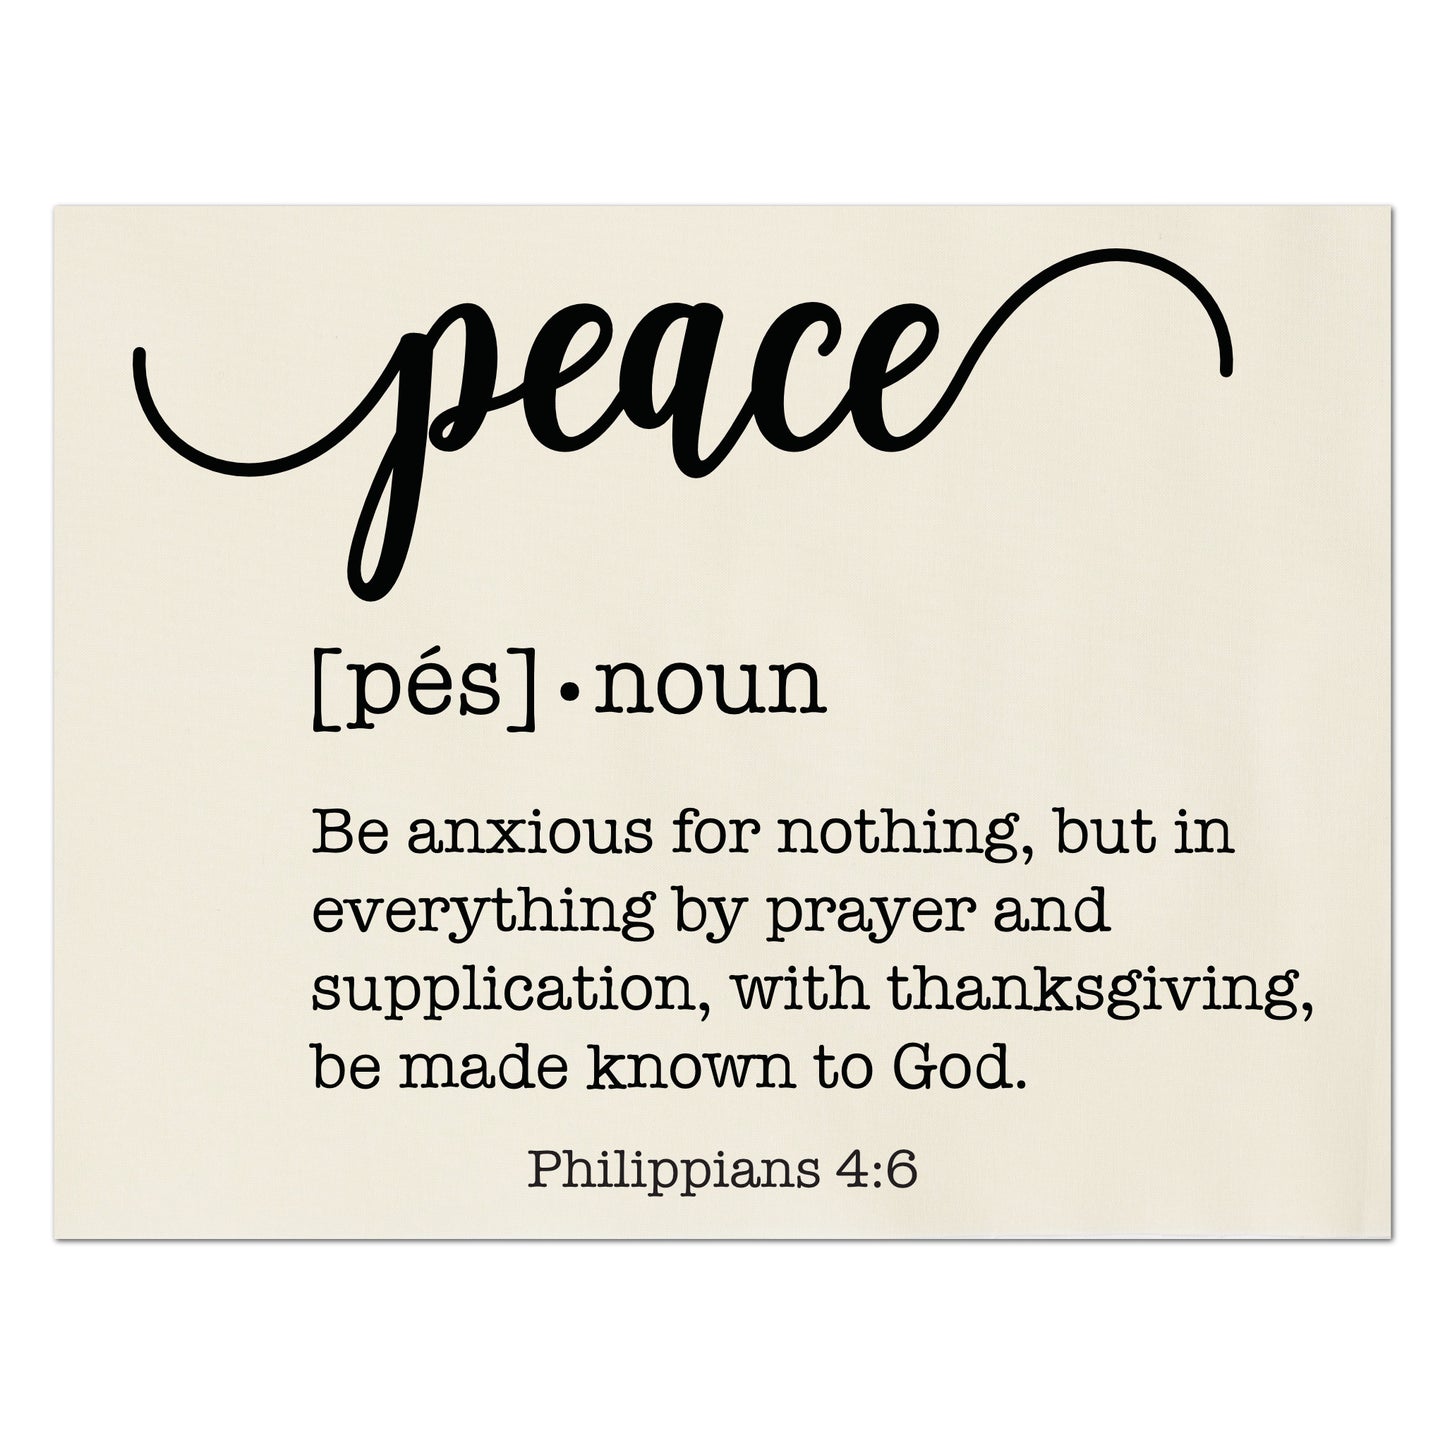 Peace Fabric - Be anxious for nothing, but in everything by prayer and supplication, with thanksgiving, be made known to God. - Philippians 4:6